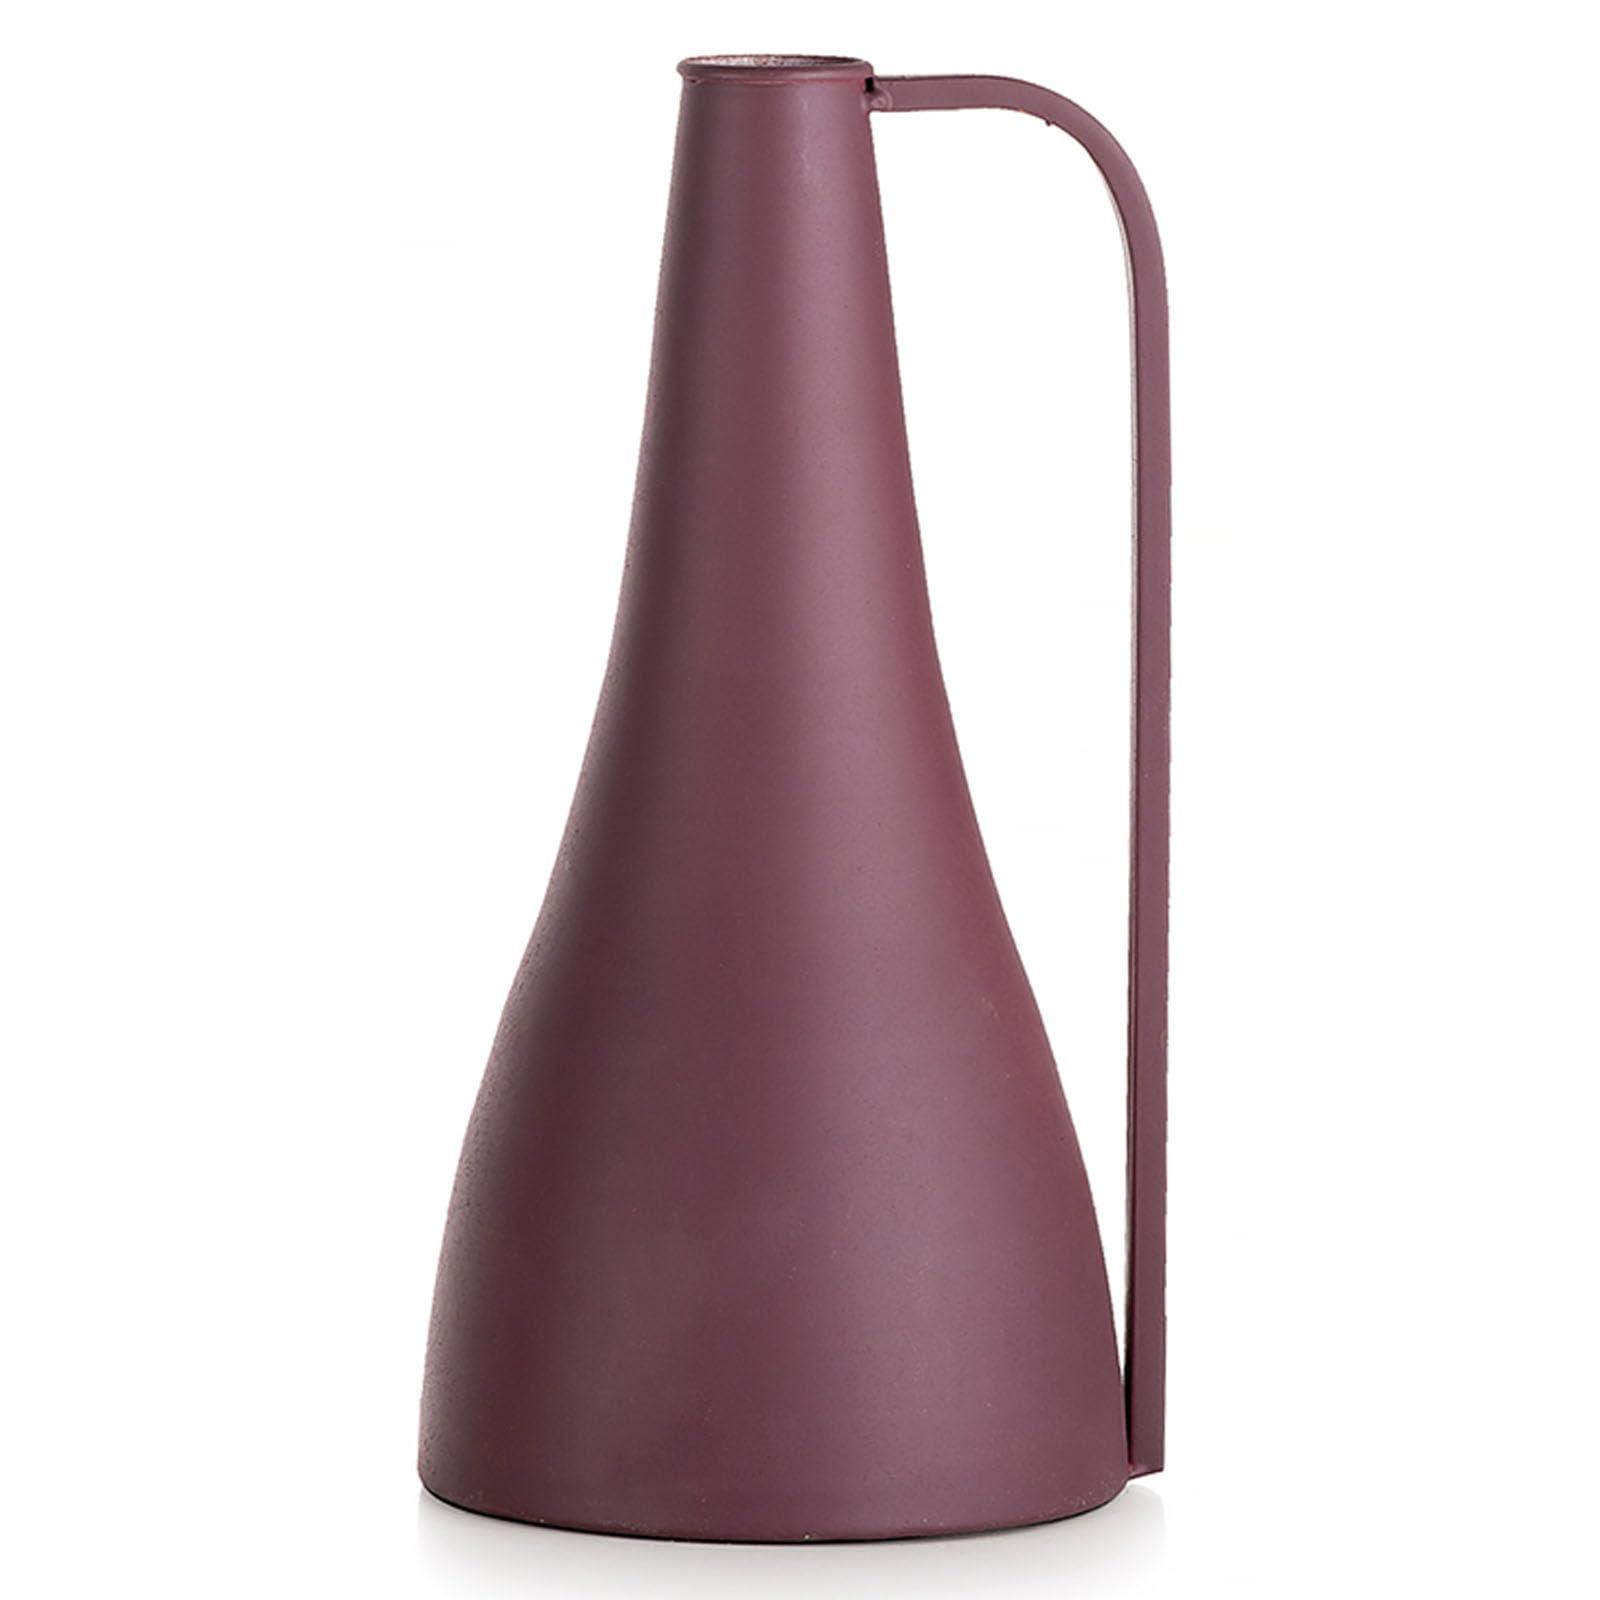 Sziqiqi Metal Pitcher Flowers Vases - 23.5cm Modern Vases with Handle Red Single Stem Vase for Table Morandi Narrow Neck Vases for Artificial Plants Love Gift for Mum Women Wife Sister